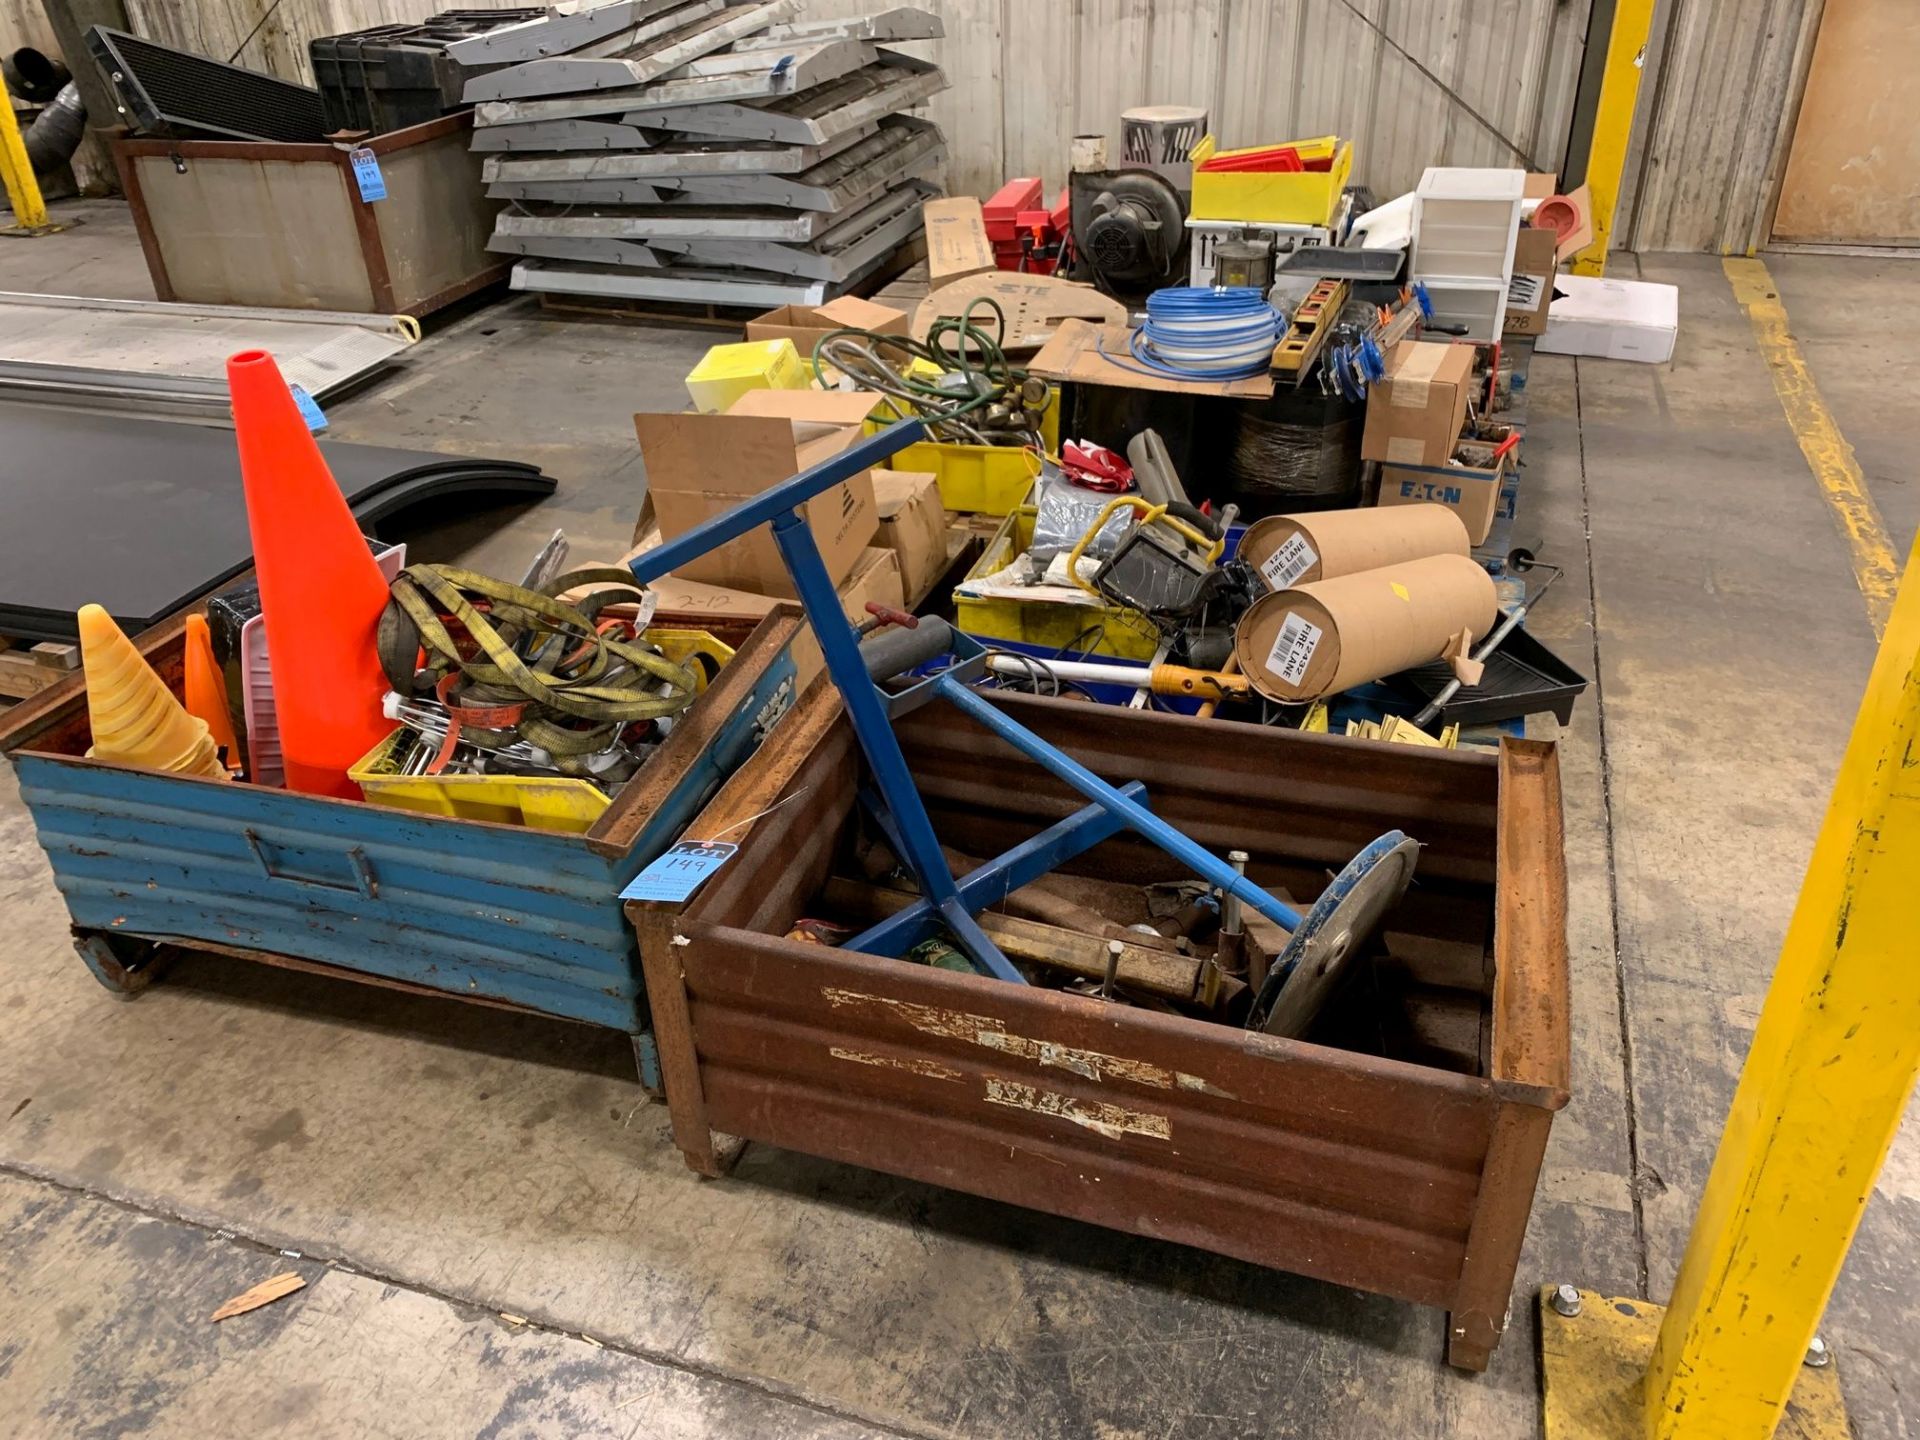 (LOT) MISCELLANEOUS PARTS, TOOLS, HOSE AND BUILDING MAINTENANCE SUPPLIES